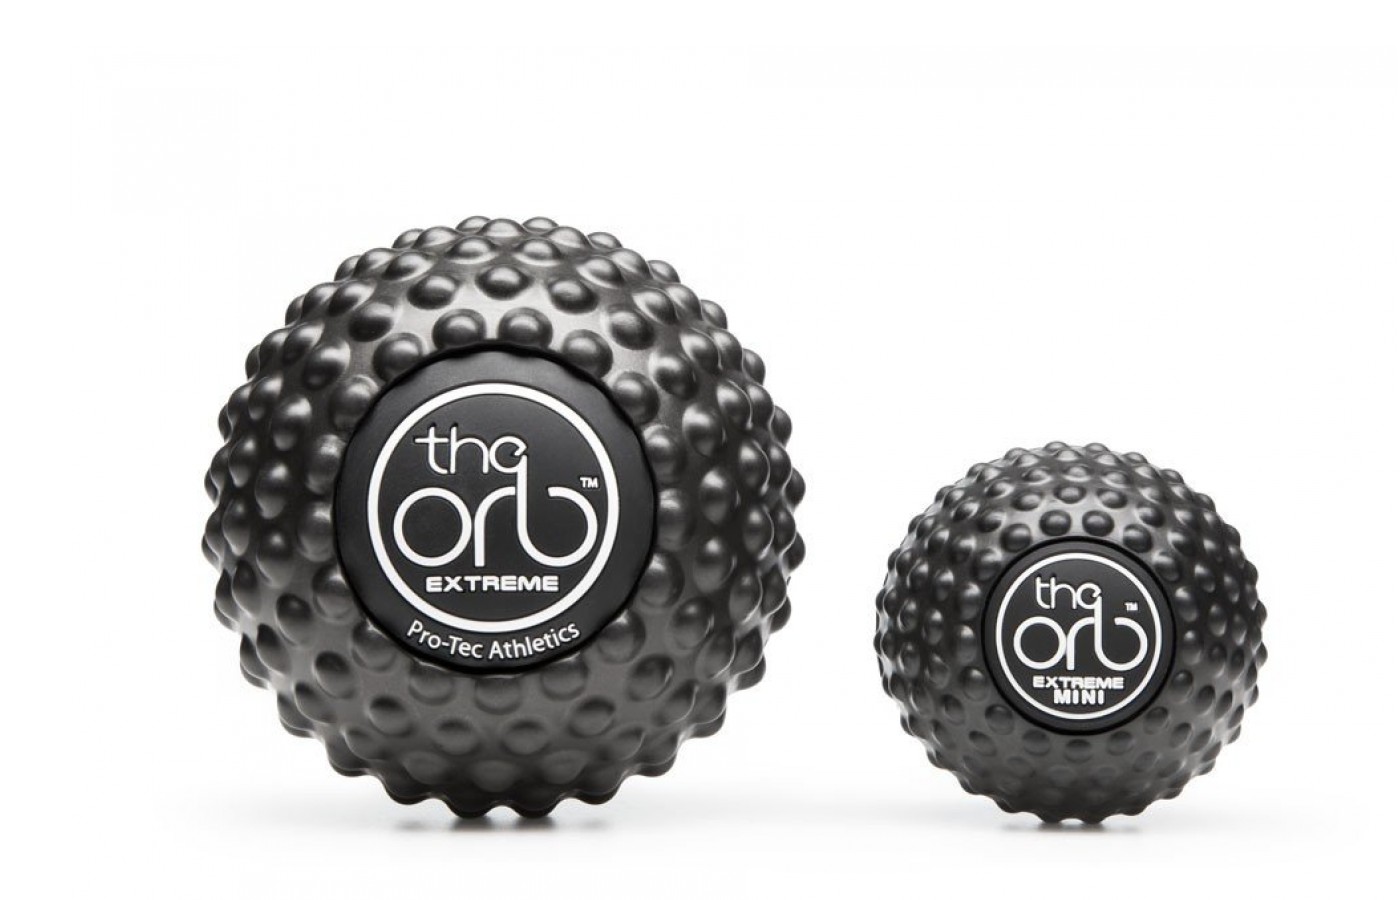 The Orb Massage Ball extreme